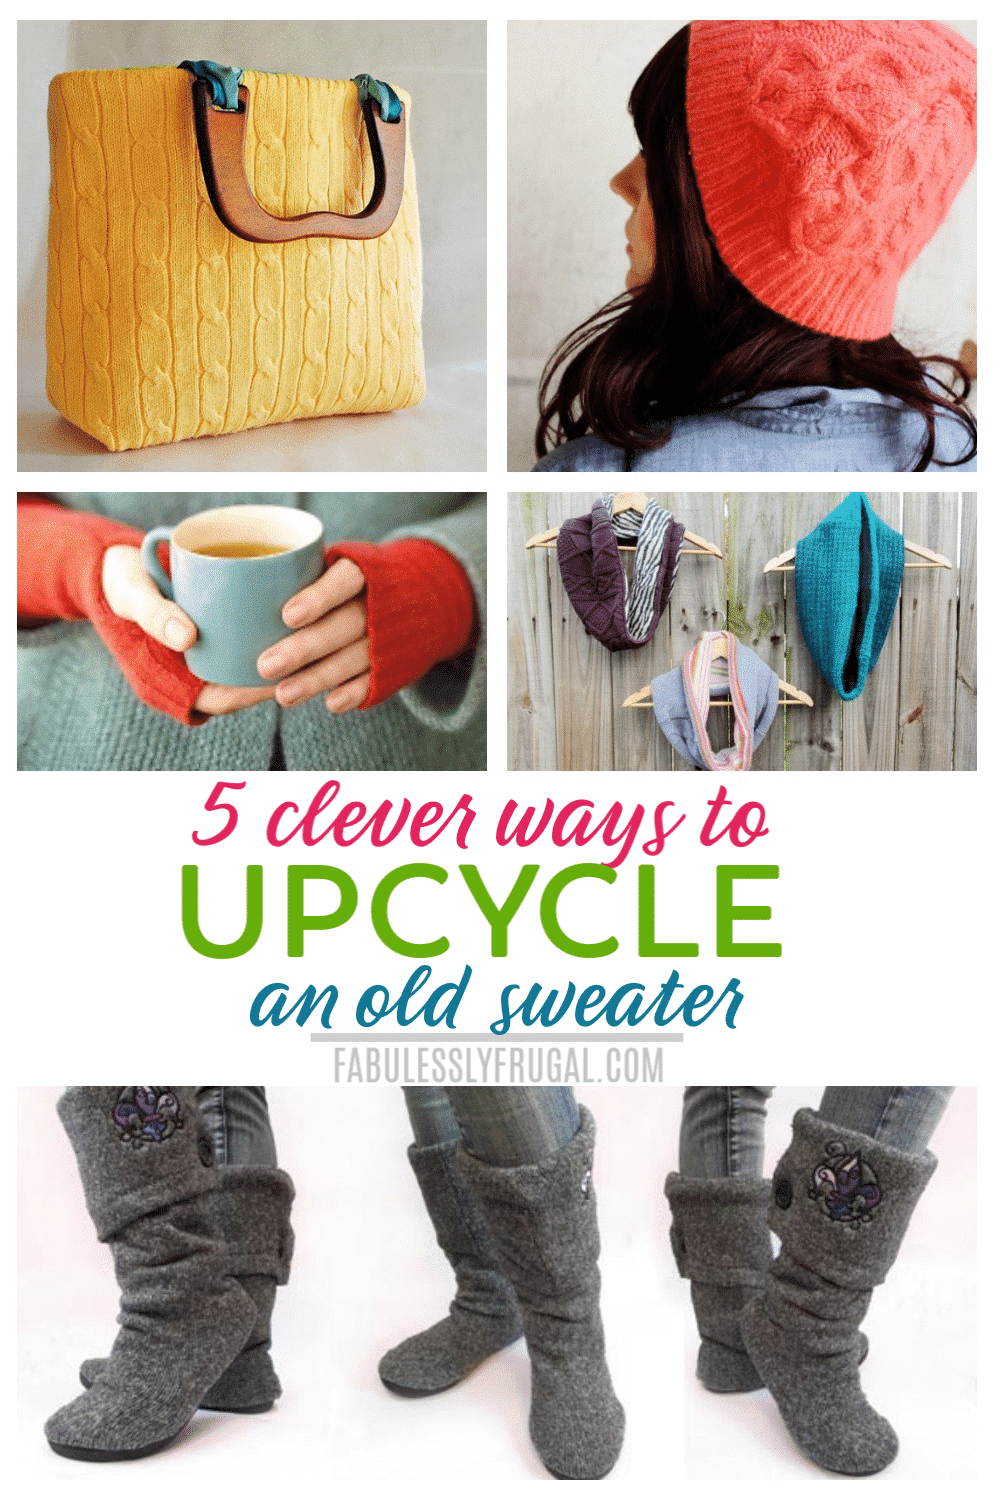 Upcycle sweater ideas